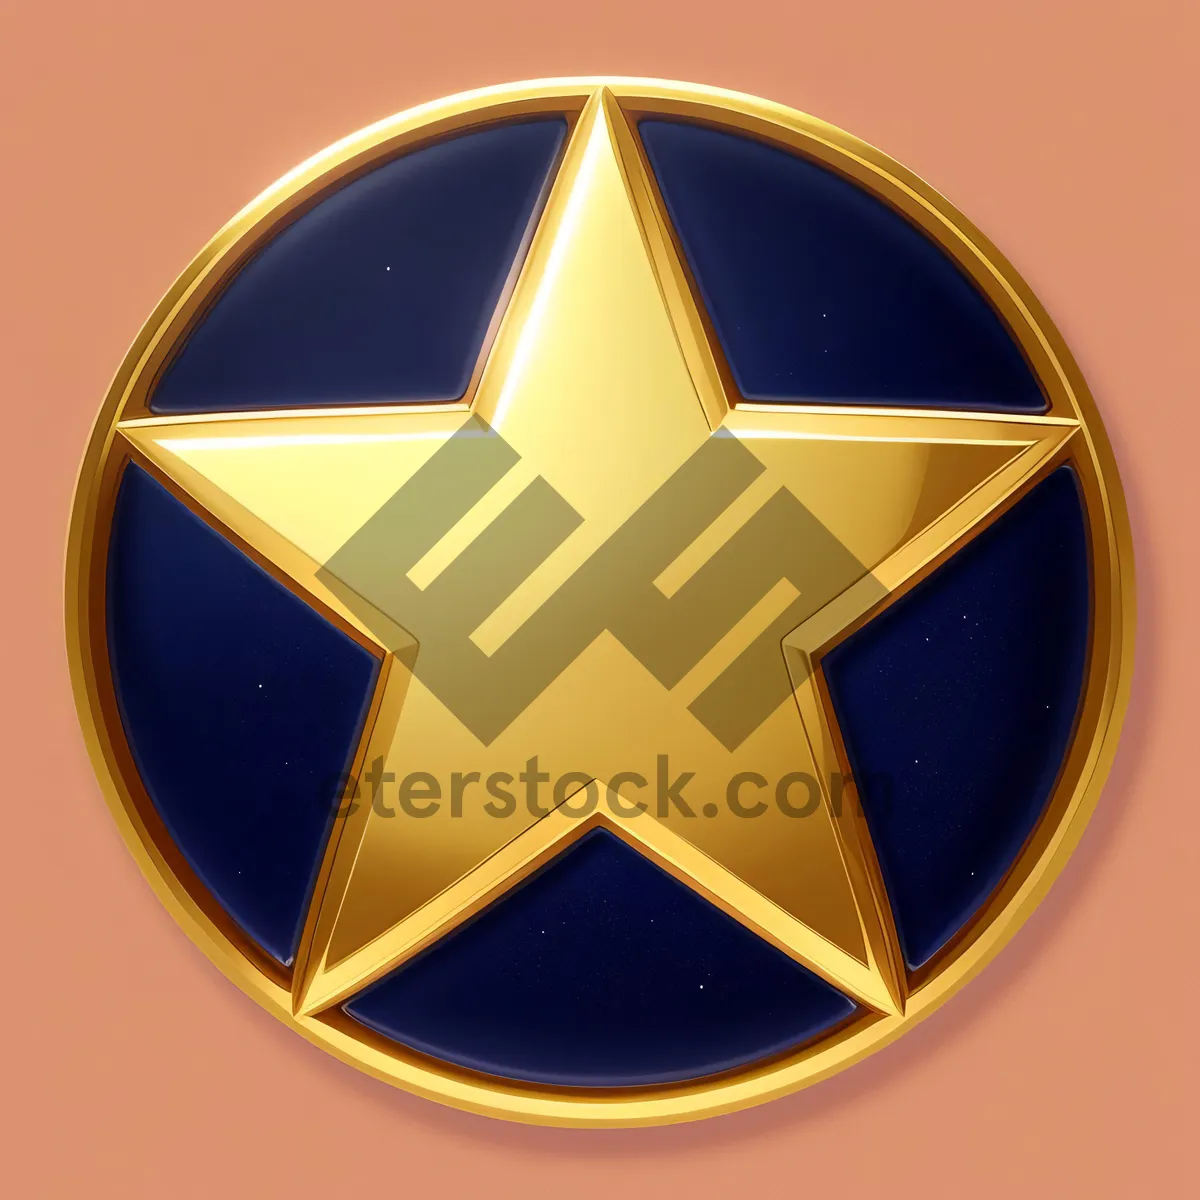 Picture of Shiny Black Round Metal Button Symbol